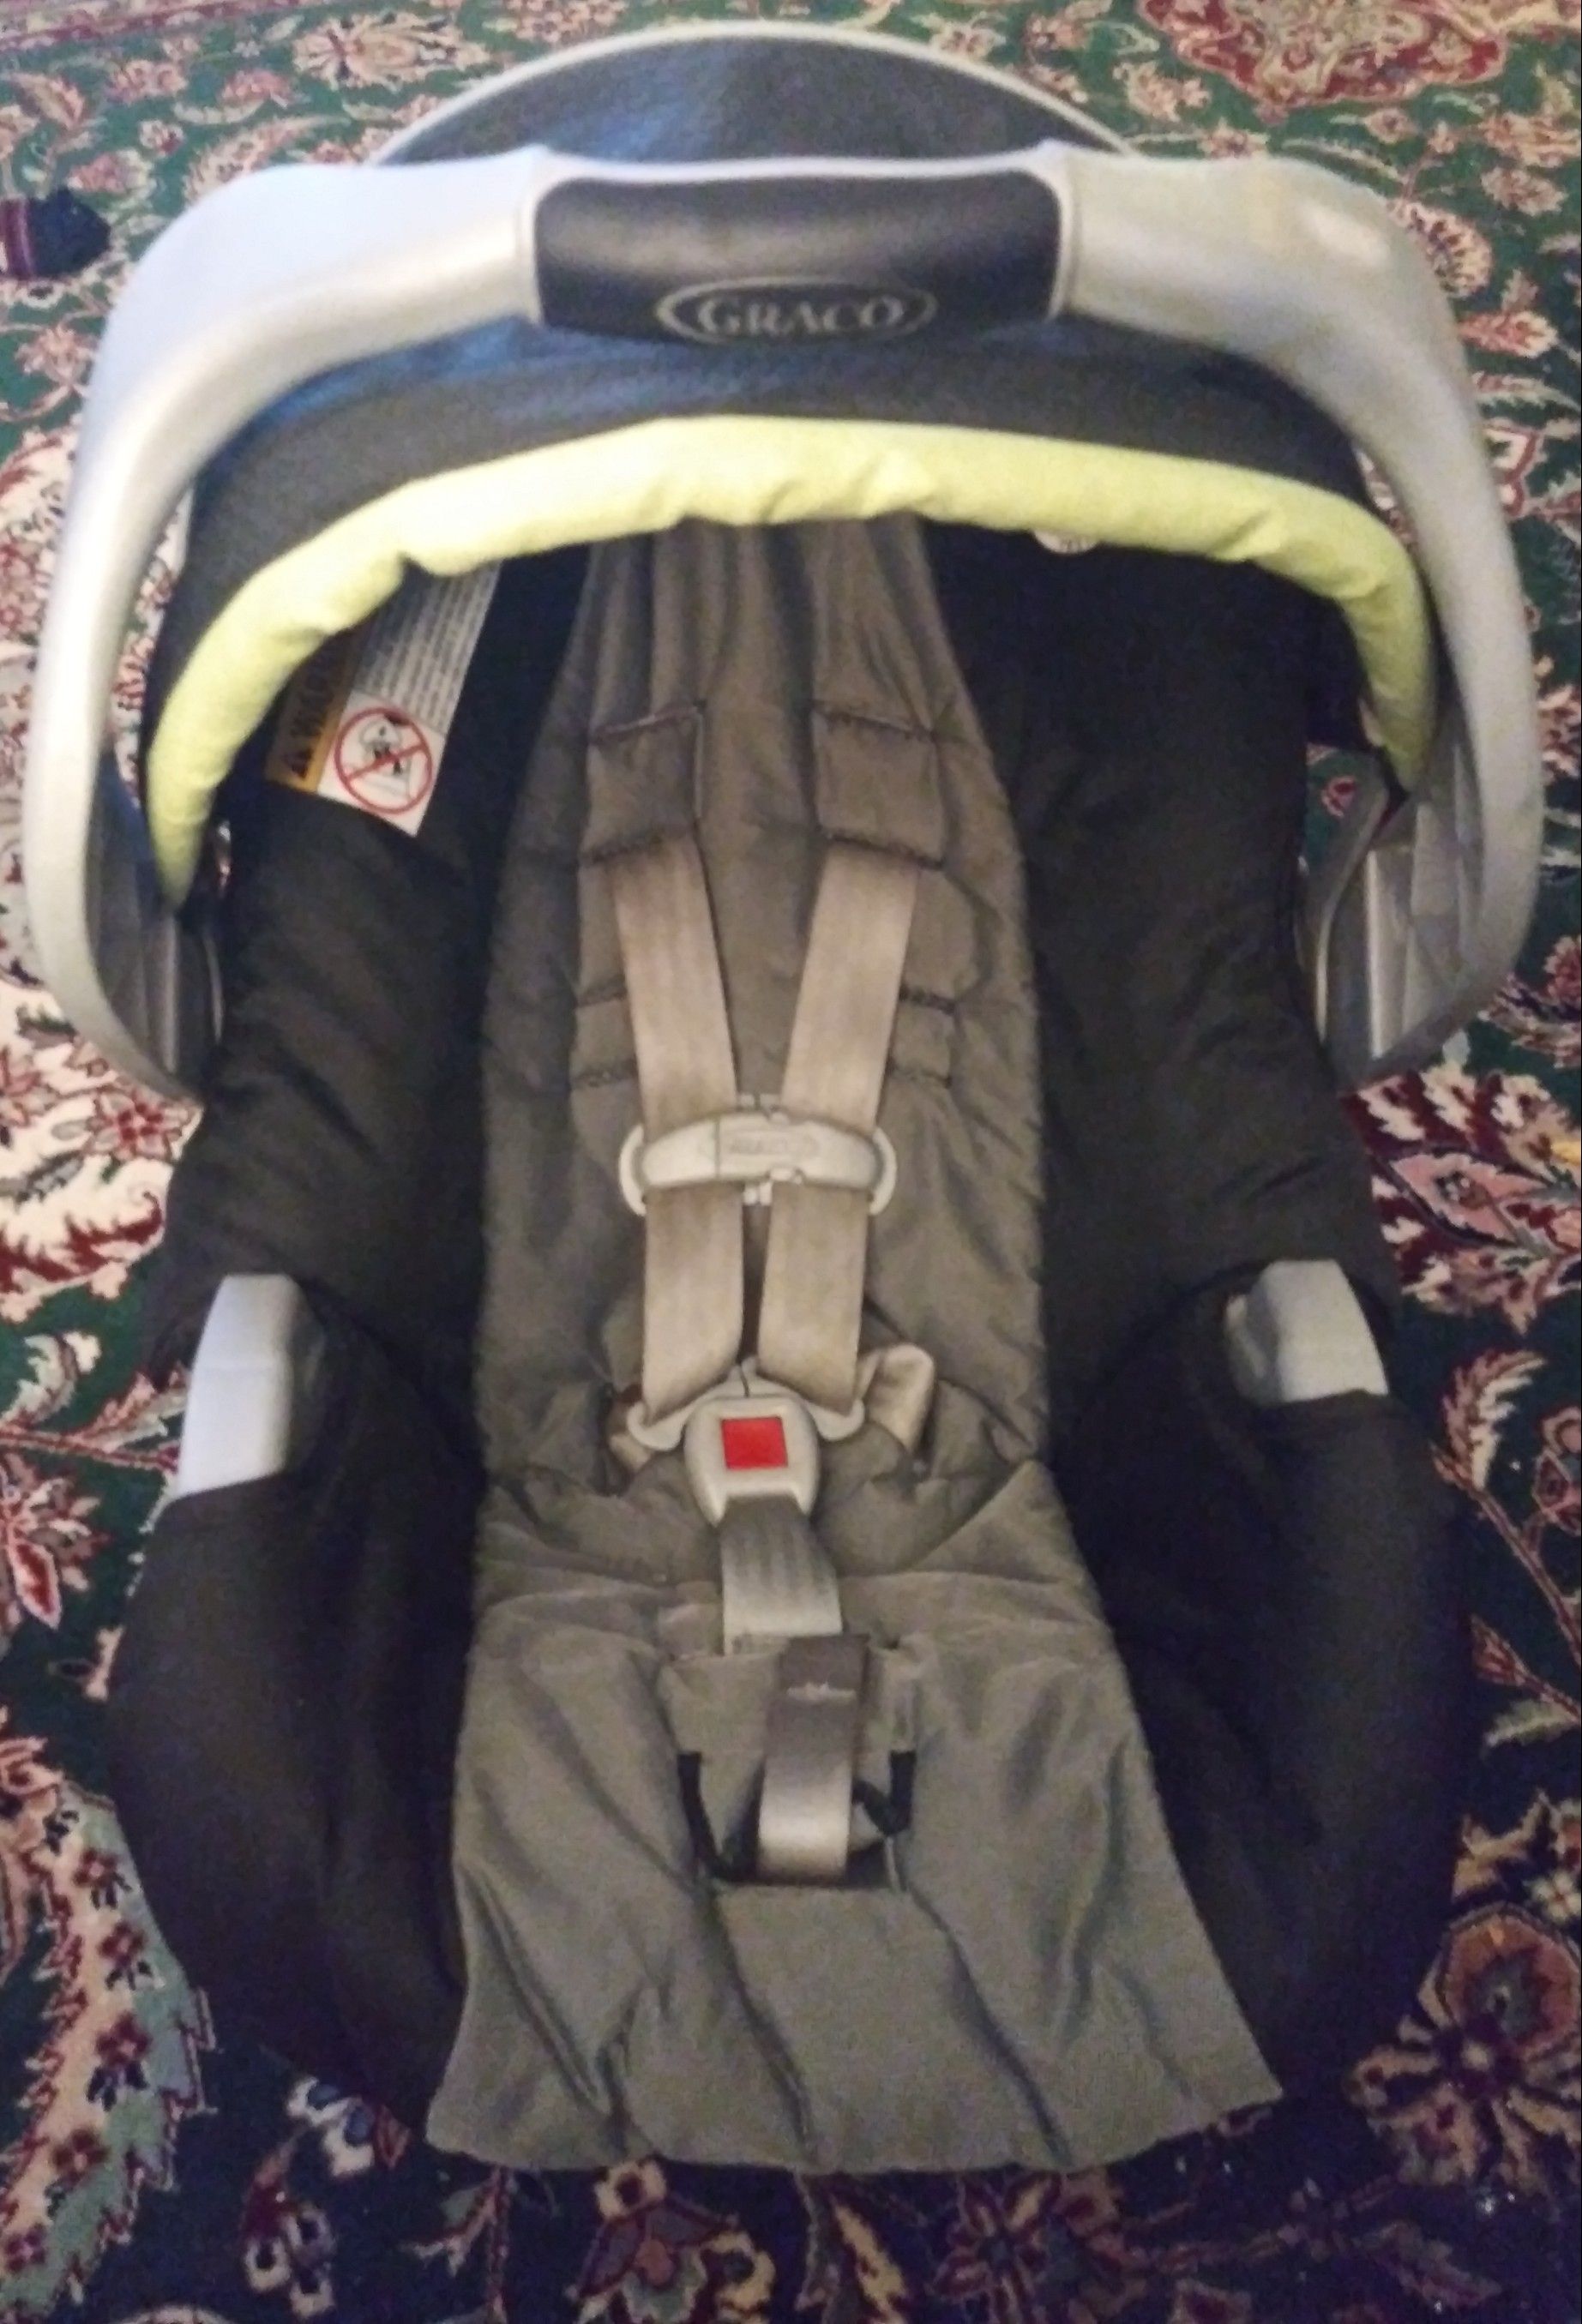 Graco infant car seat with base